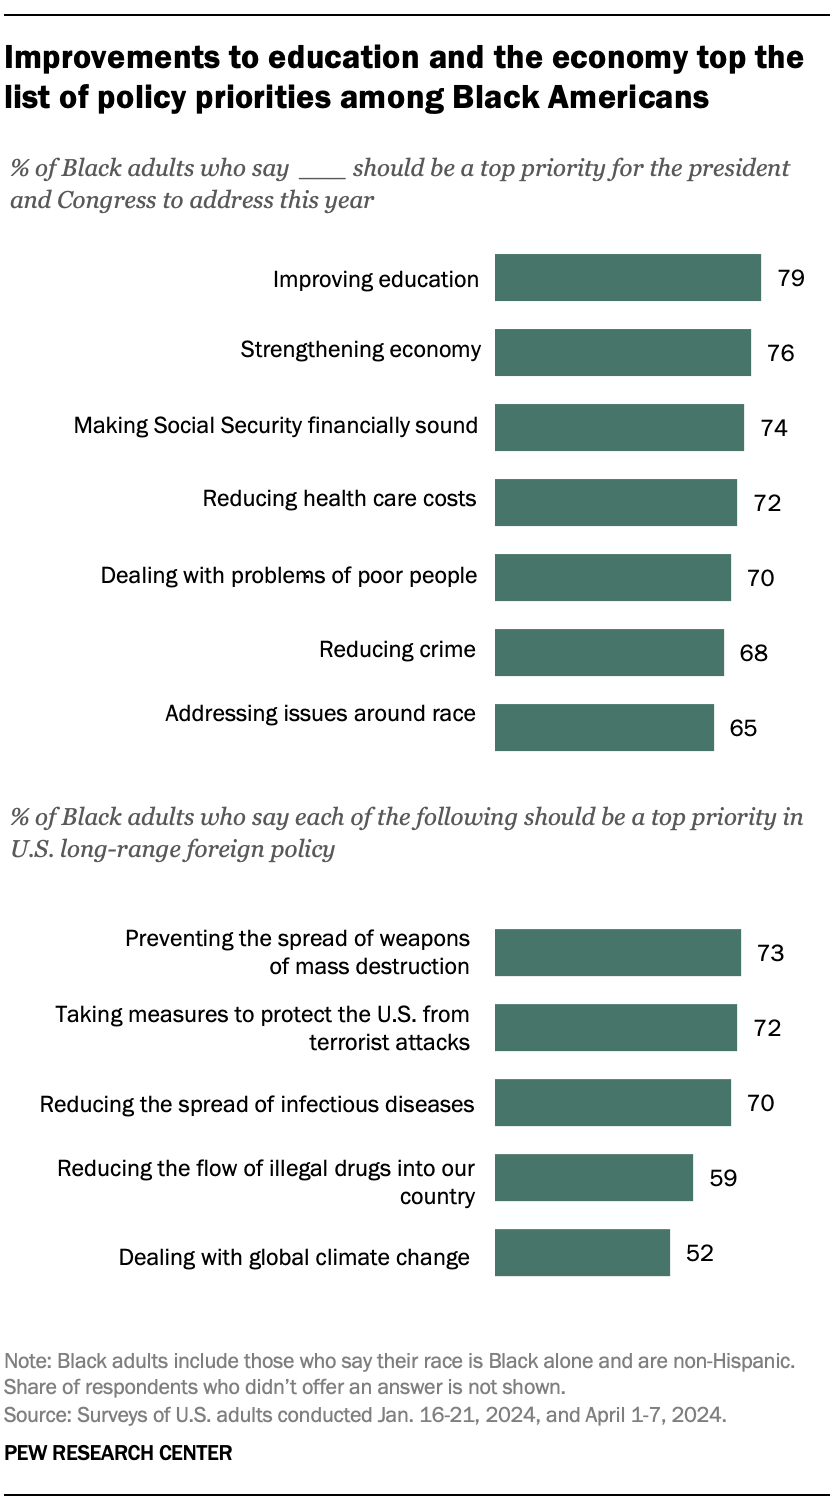 A bar chart showing that Improvements to education and the economy top the list of policy priorities among Black Americans